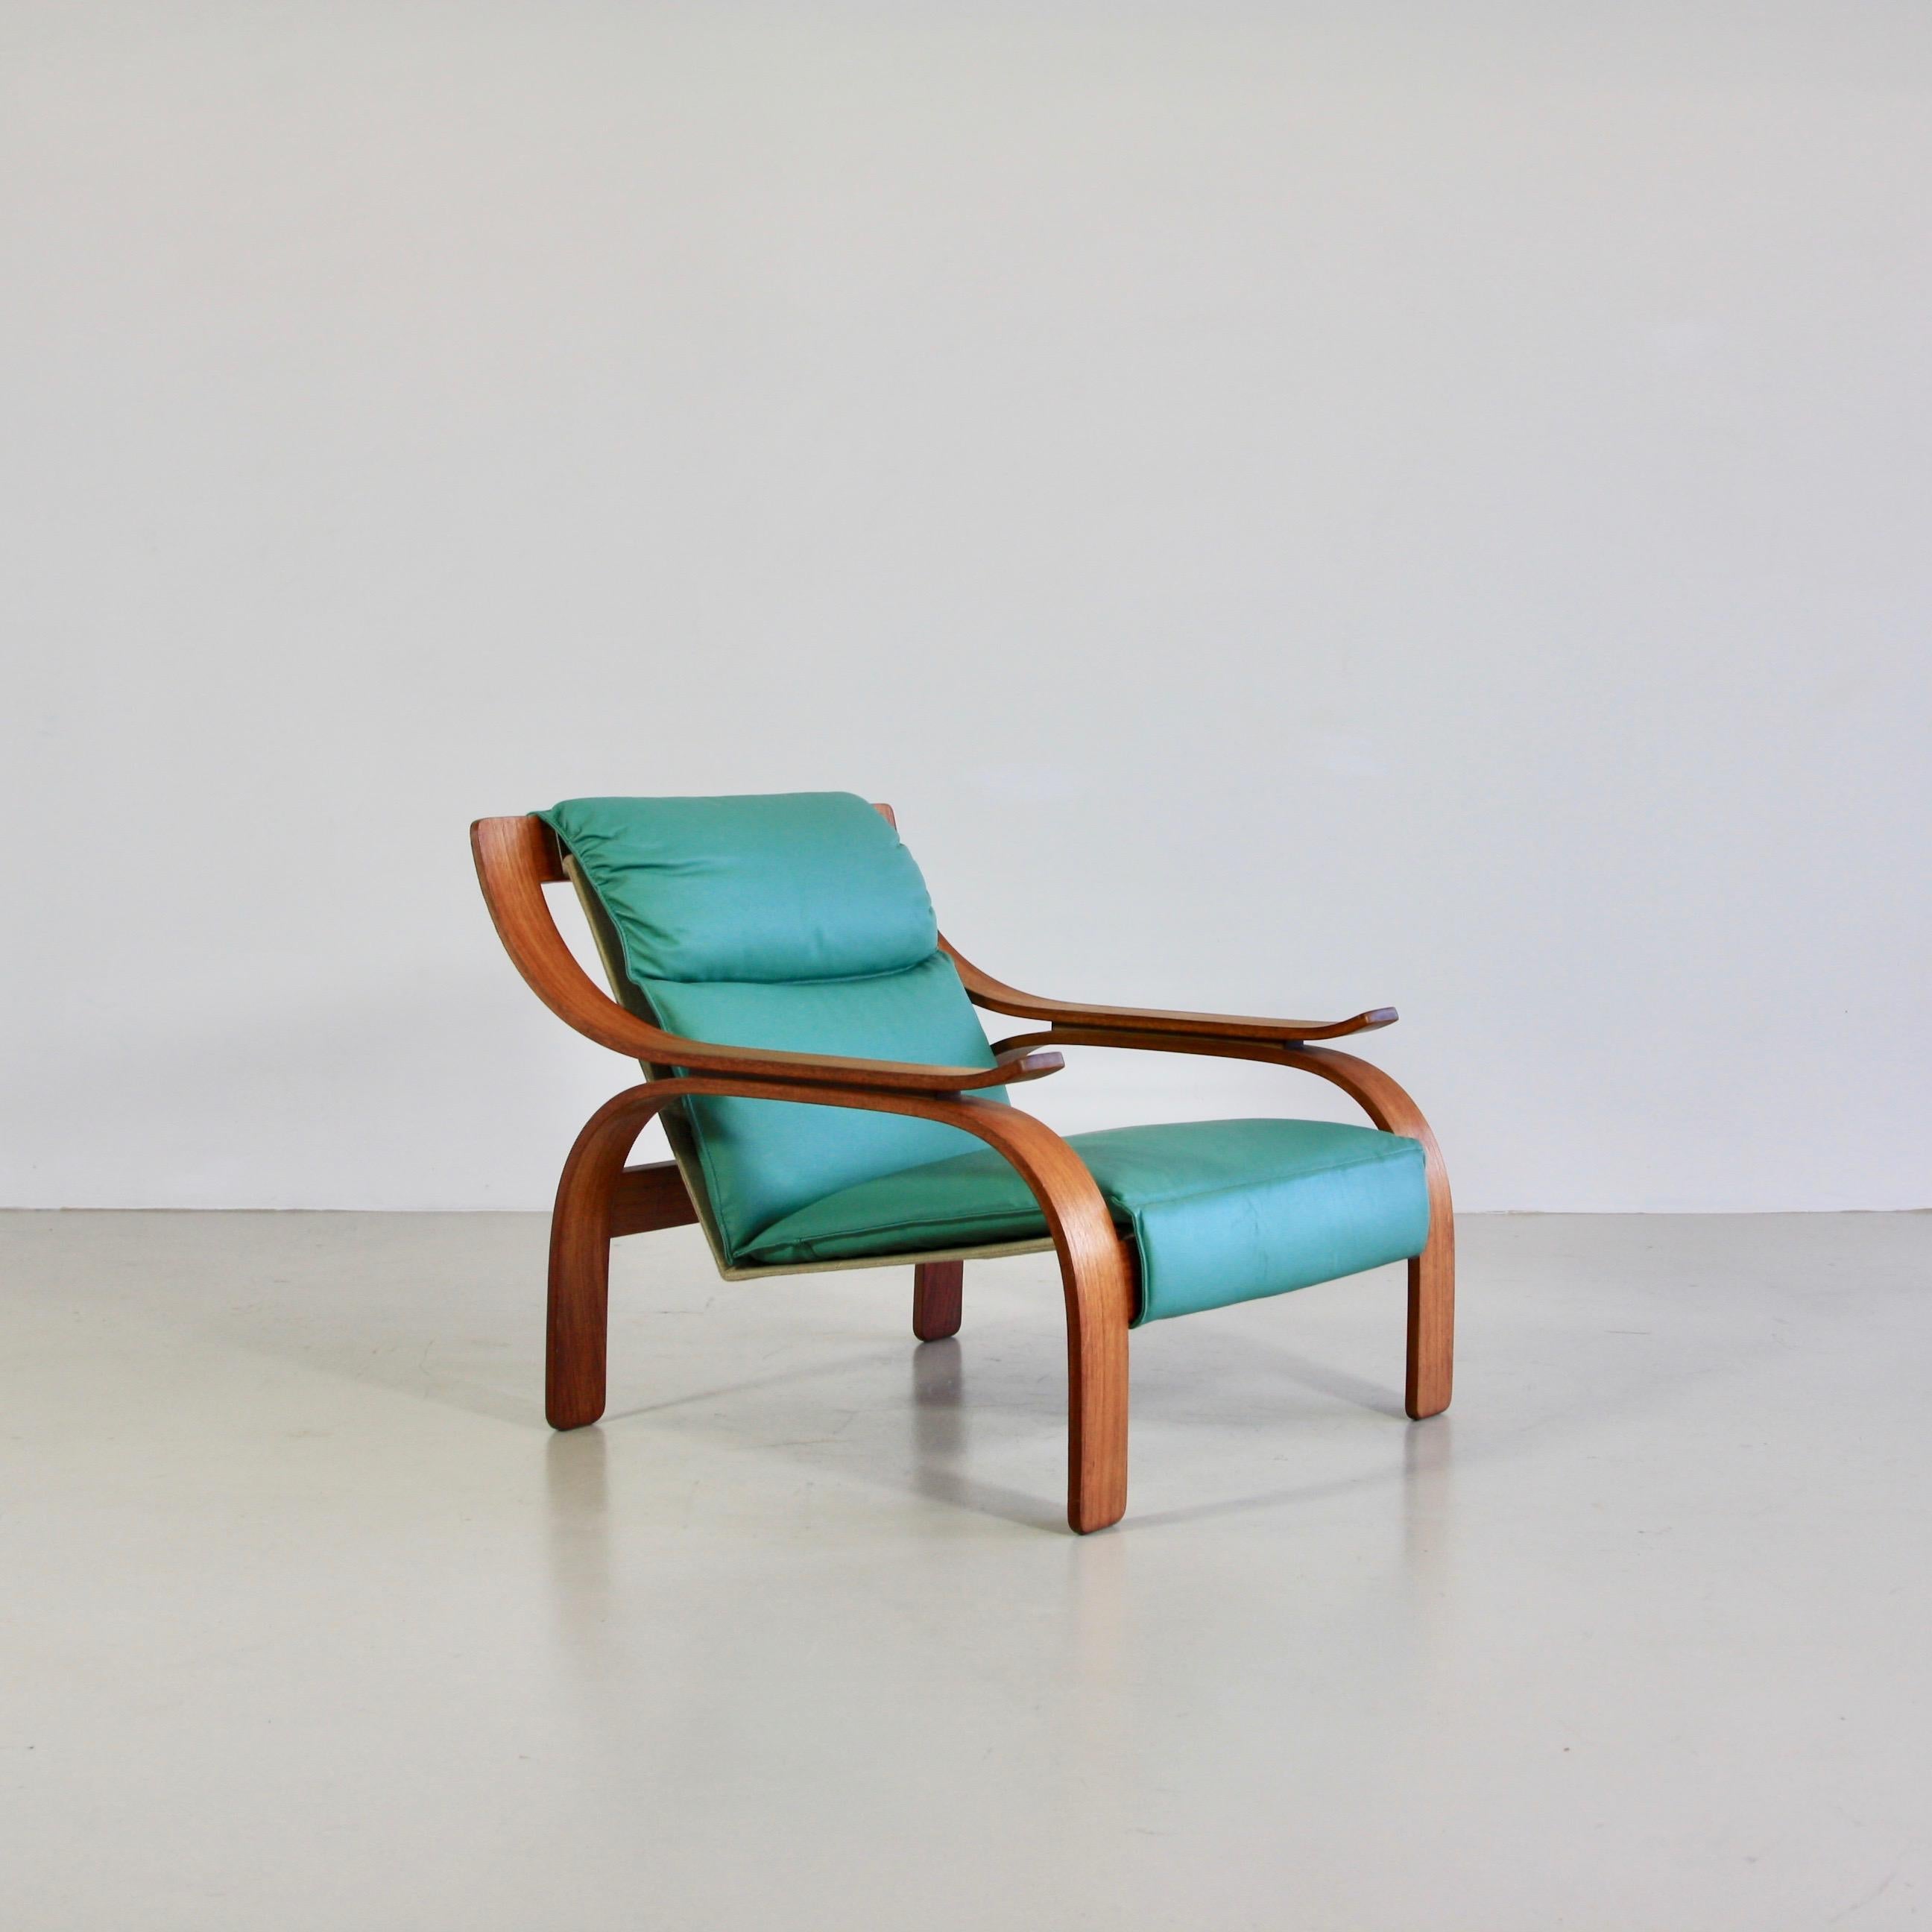 Pair of Green Leather Armchairs by Marco Zanuso, 1964 For Sale 2